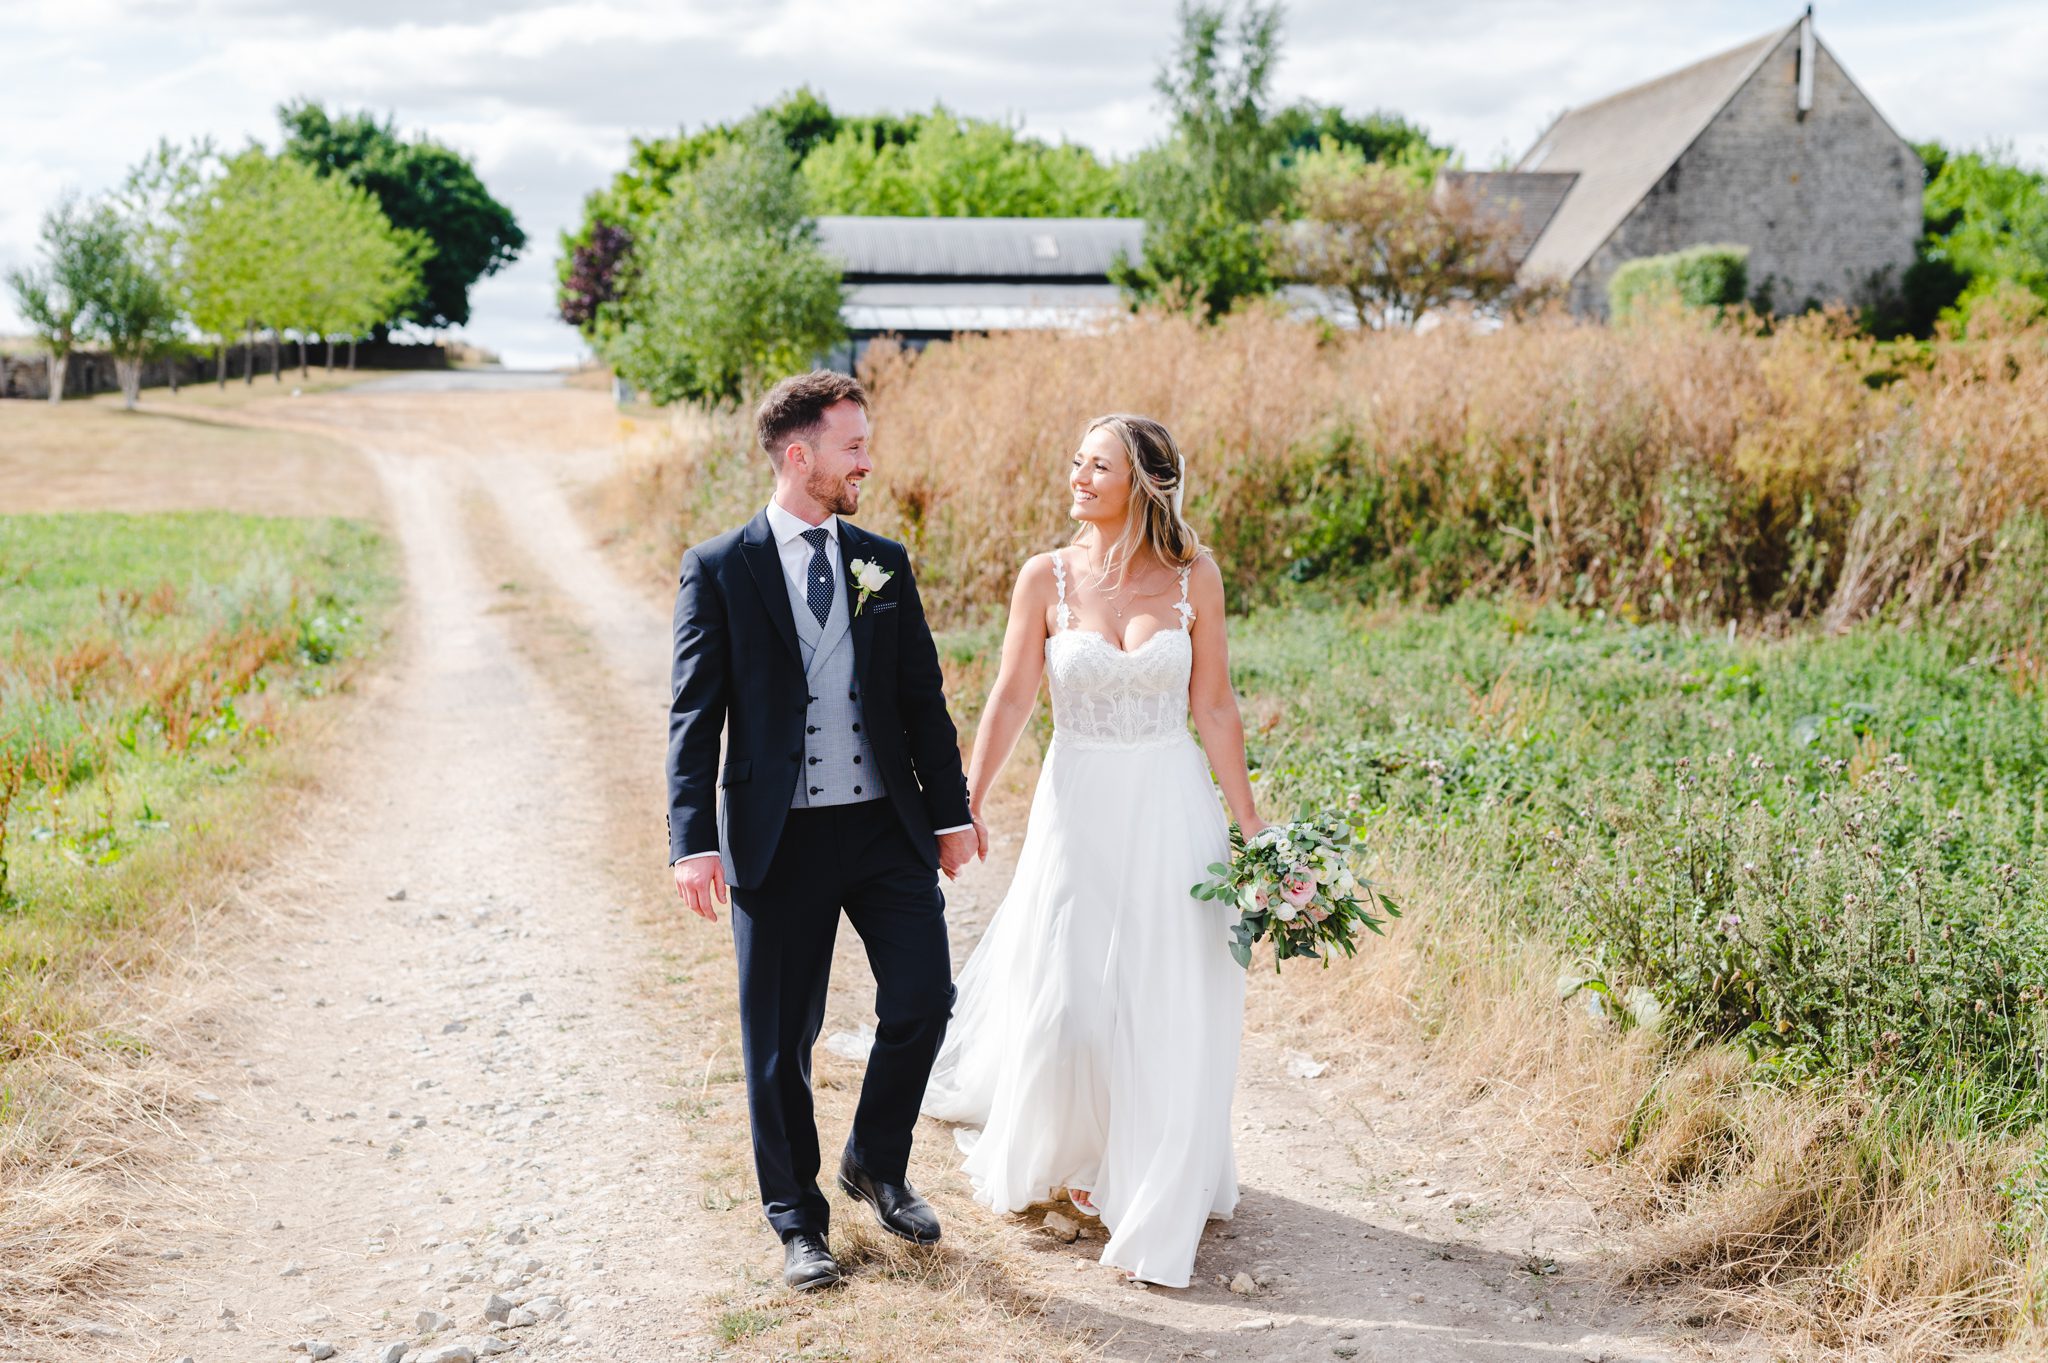 Stone Barn Wedding Photography by Bigeye Photography - Bride and Groom smiling at each other